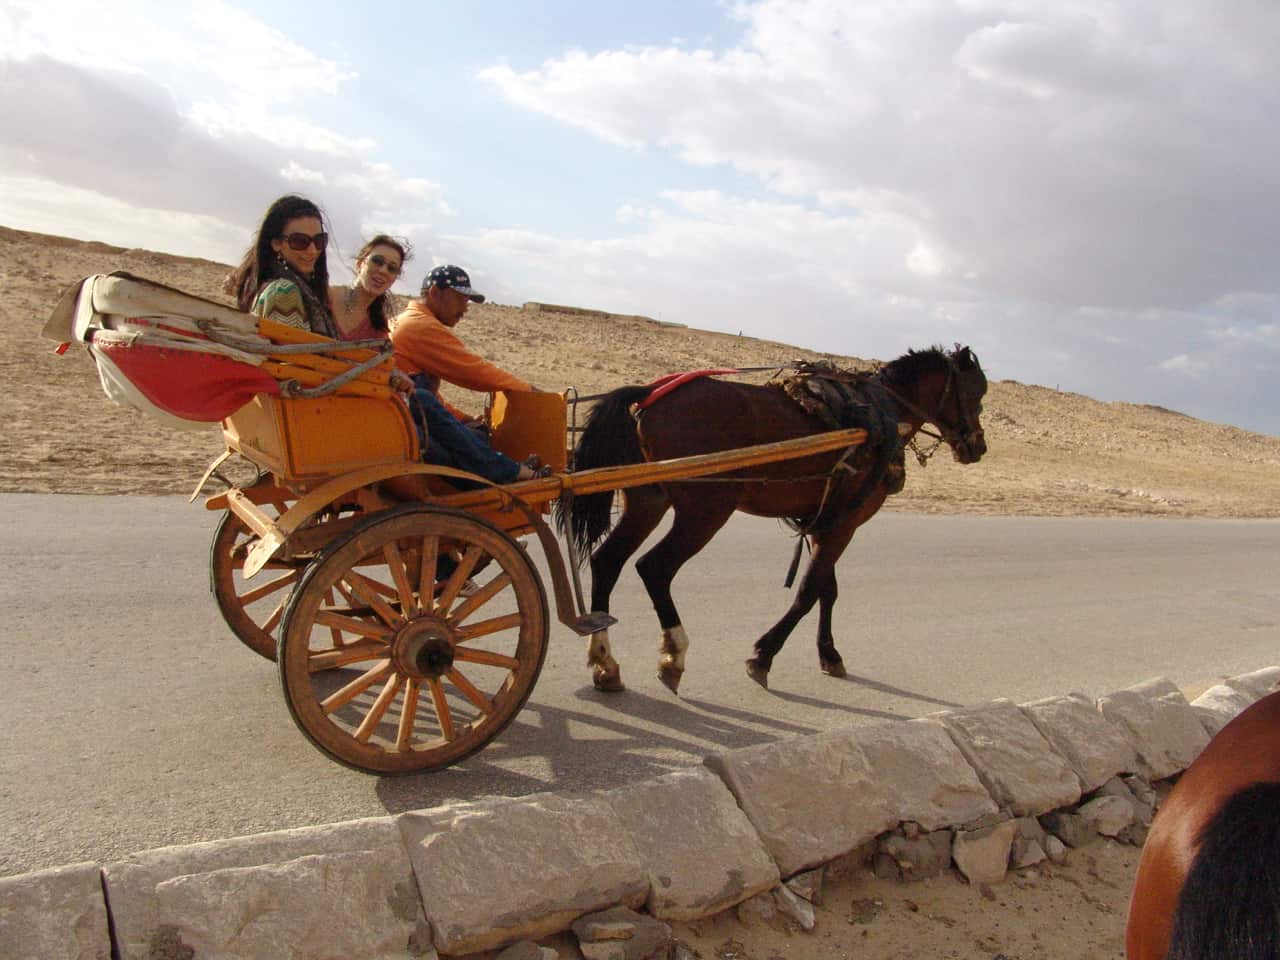 Dana and Maria on a carriage at the Pyramids of Giza in Egypt